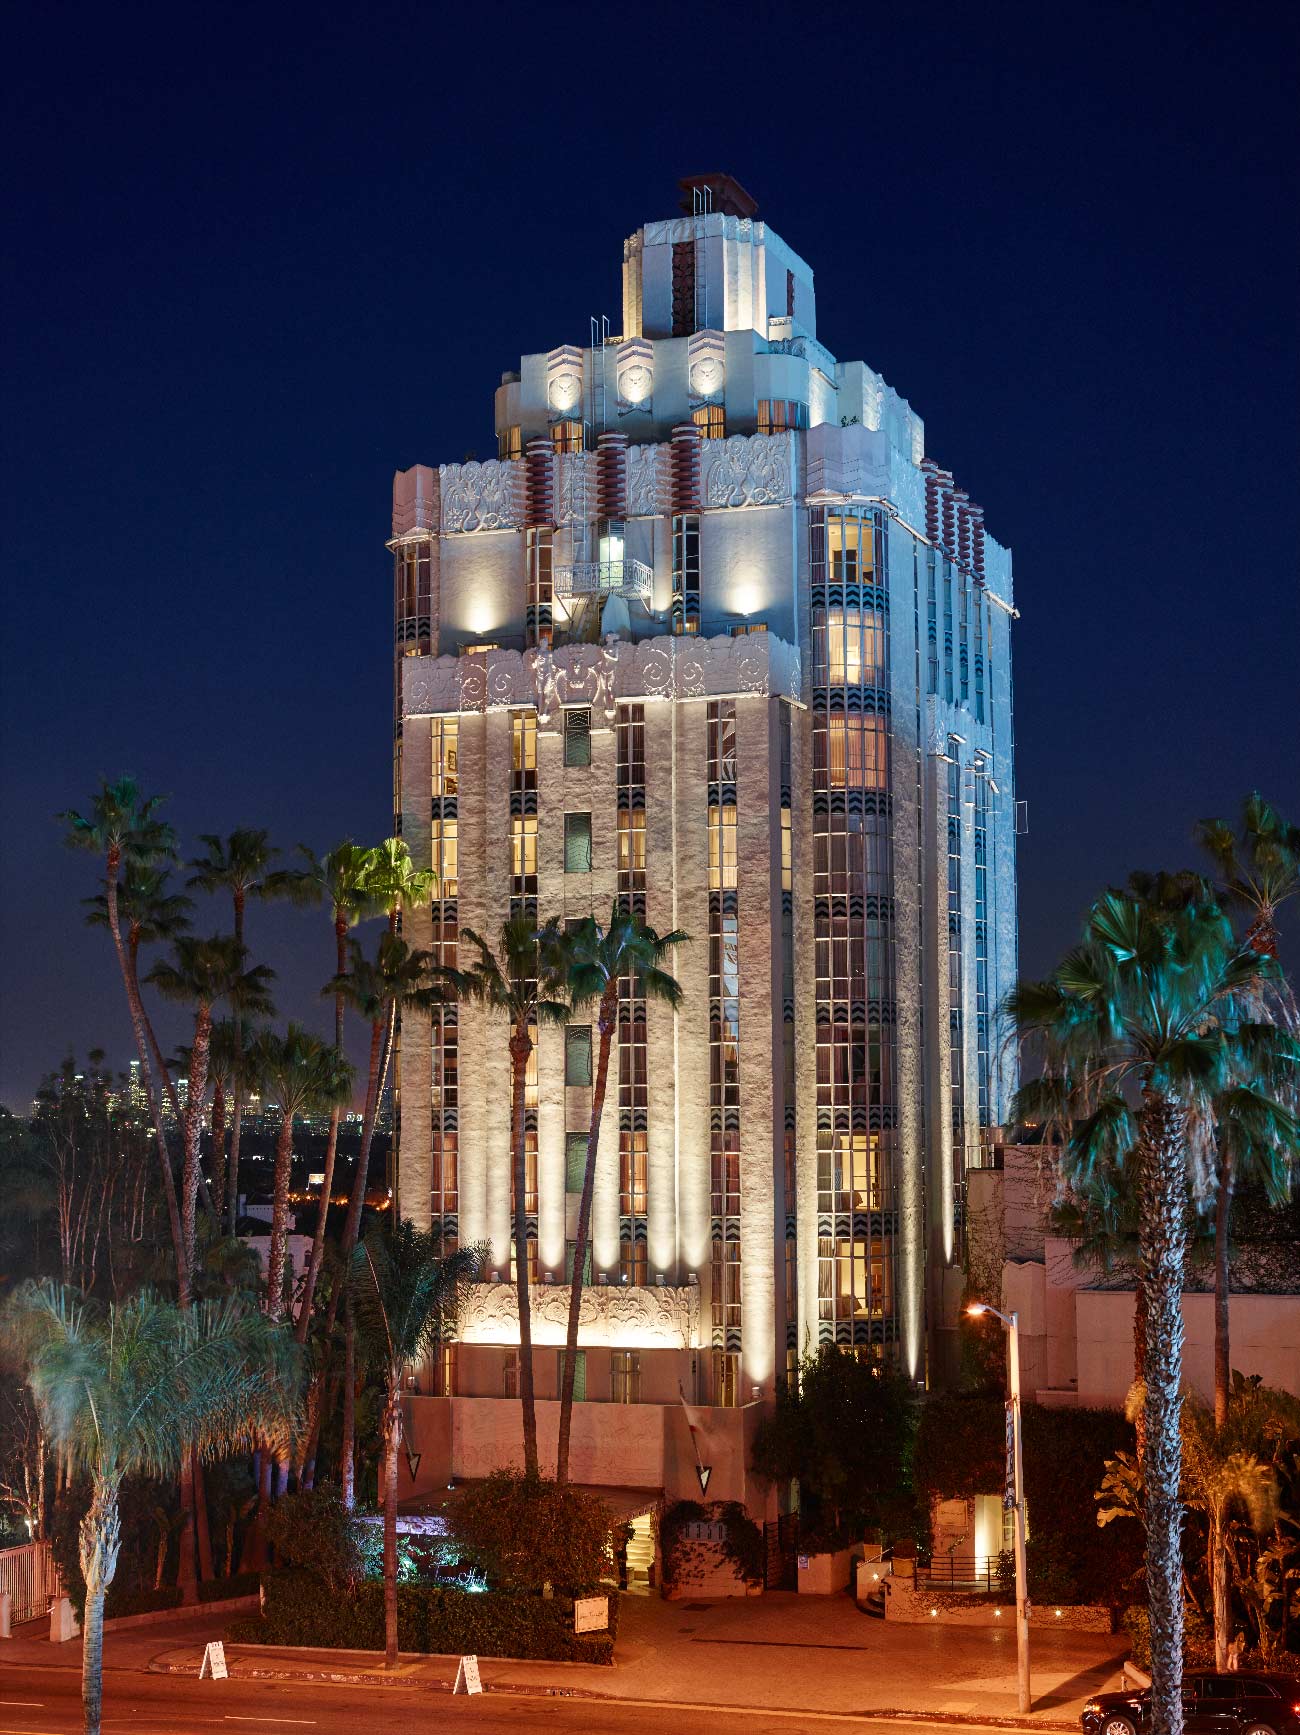 Sunset Tower Hotel - West Hollywood